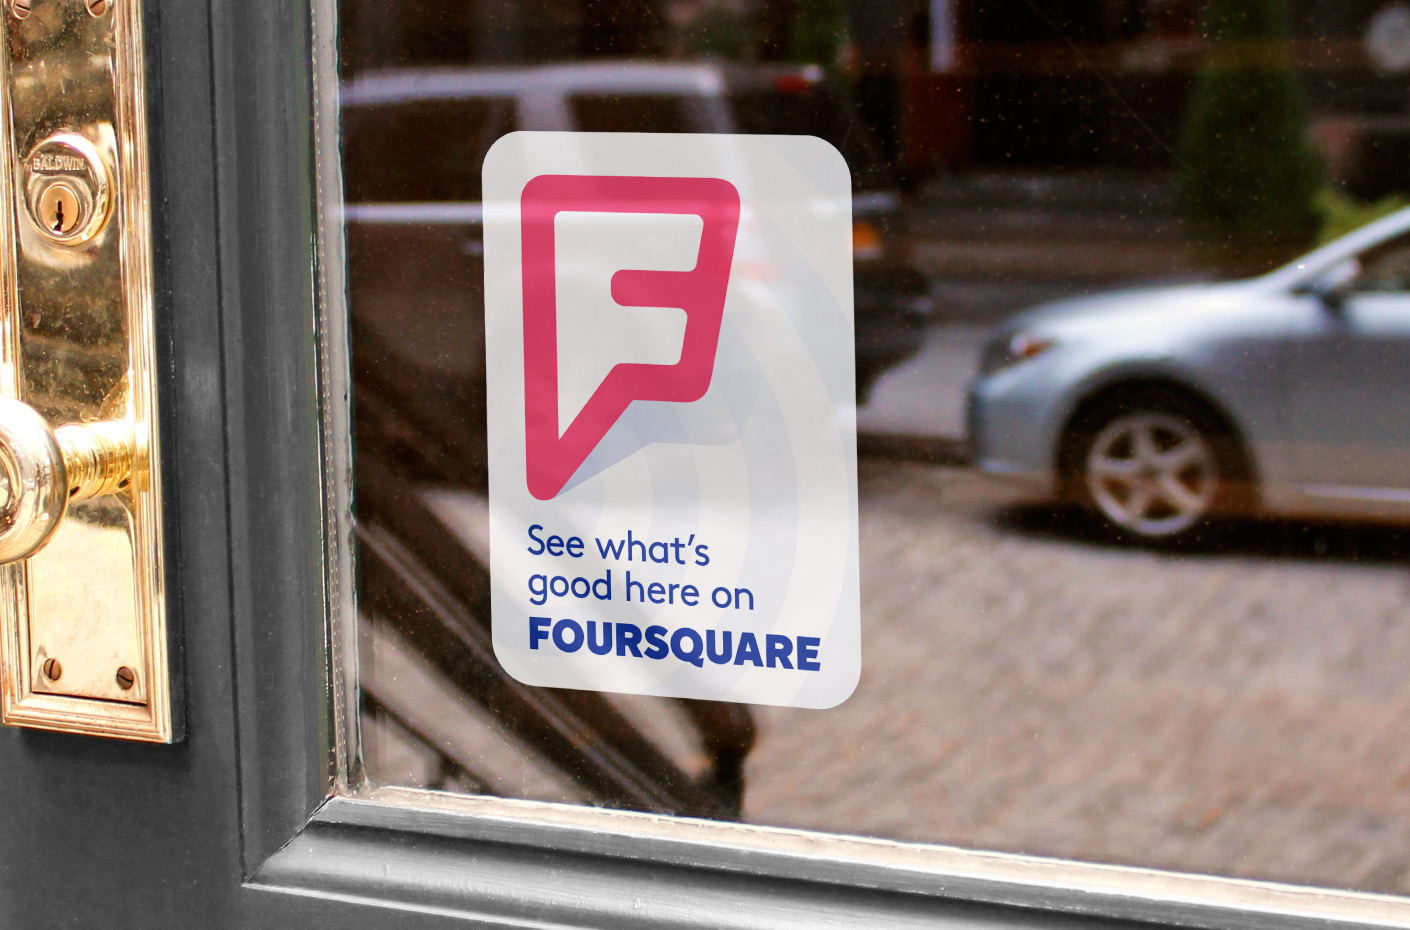 Foursquare’s iPad app is now available in the App Store